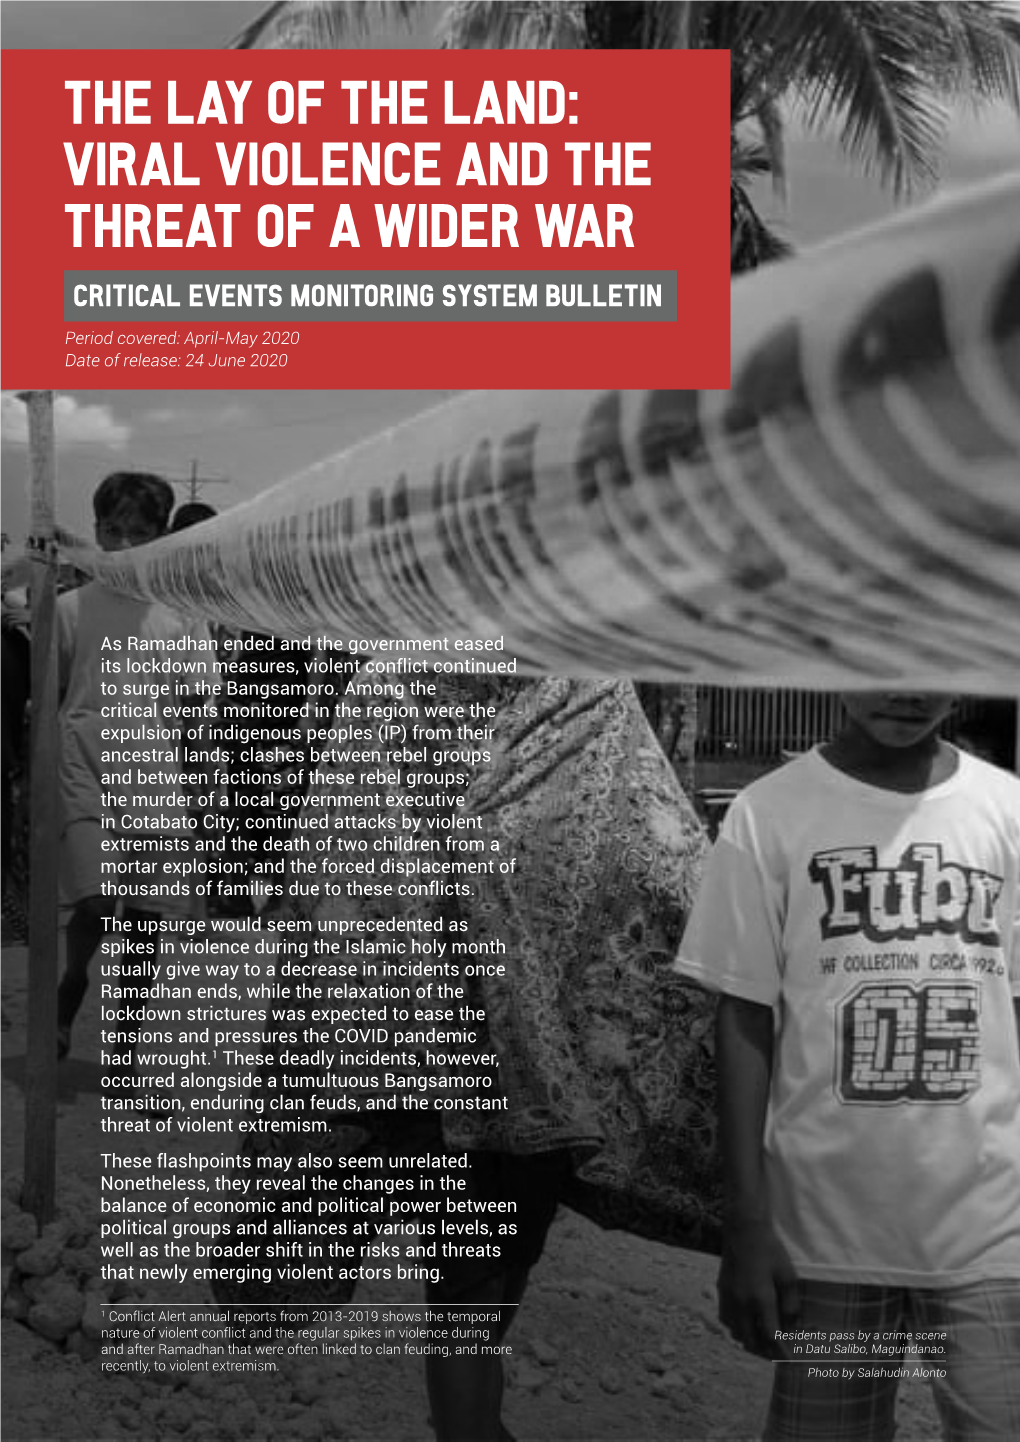 Viral Violence and the Threat of a Wider War CRITICAL EVENTS MONITORING SYSTEM BULLETIN